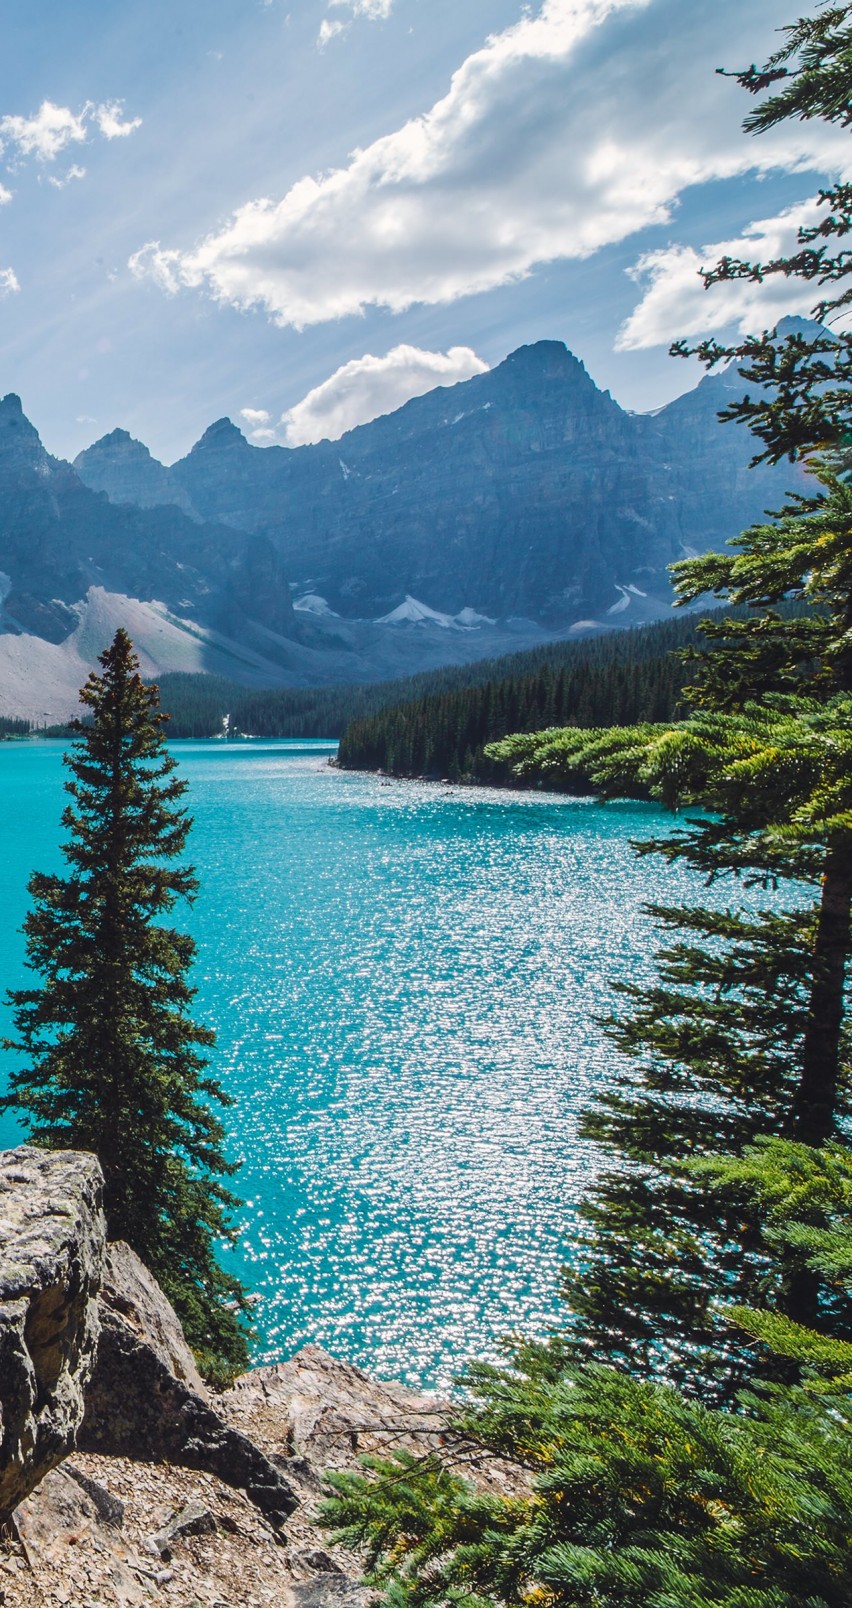 Sunny day over Moraine Lake Wallpaper for Apple iPhone 6 / 6s